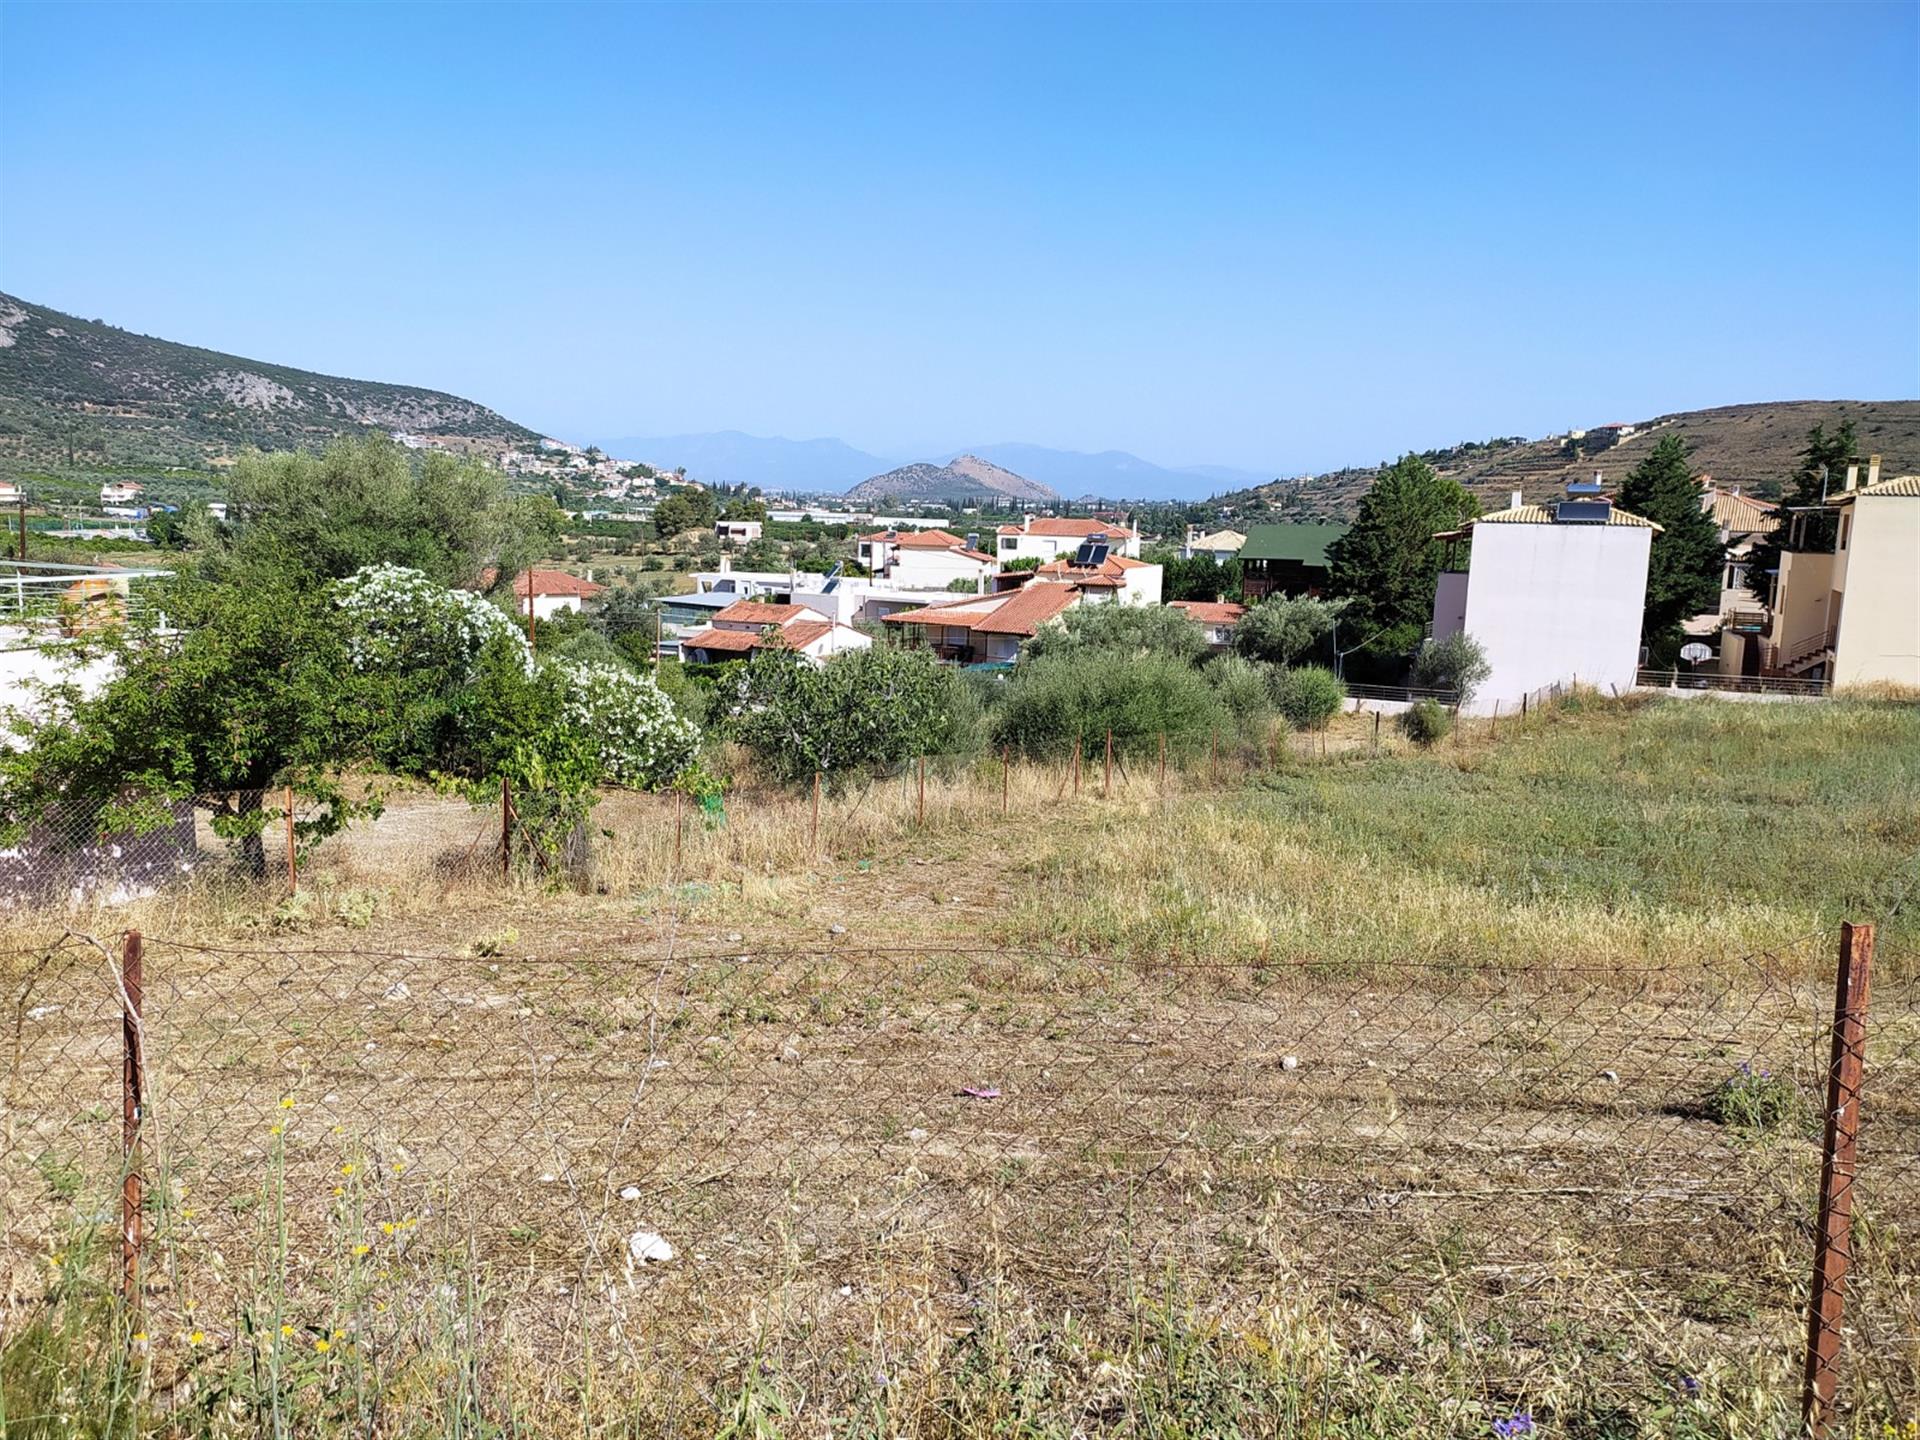 Plot of land for sale 714m2, in the center of Lefkakia village